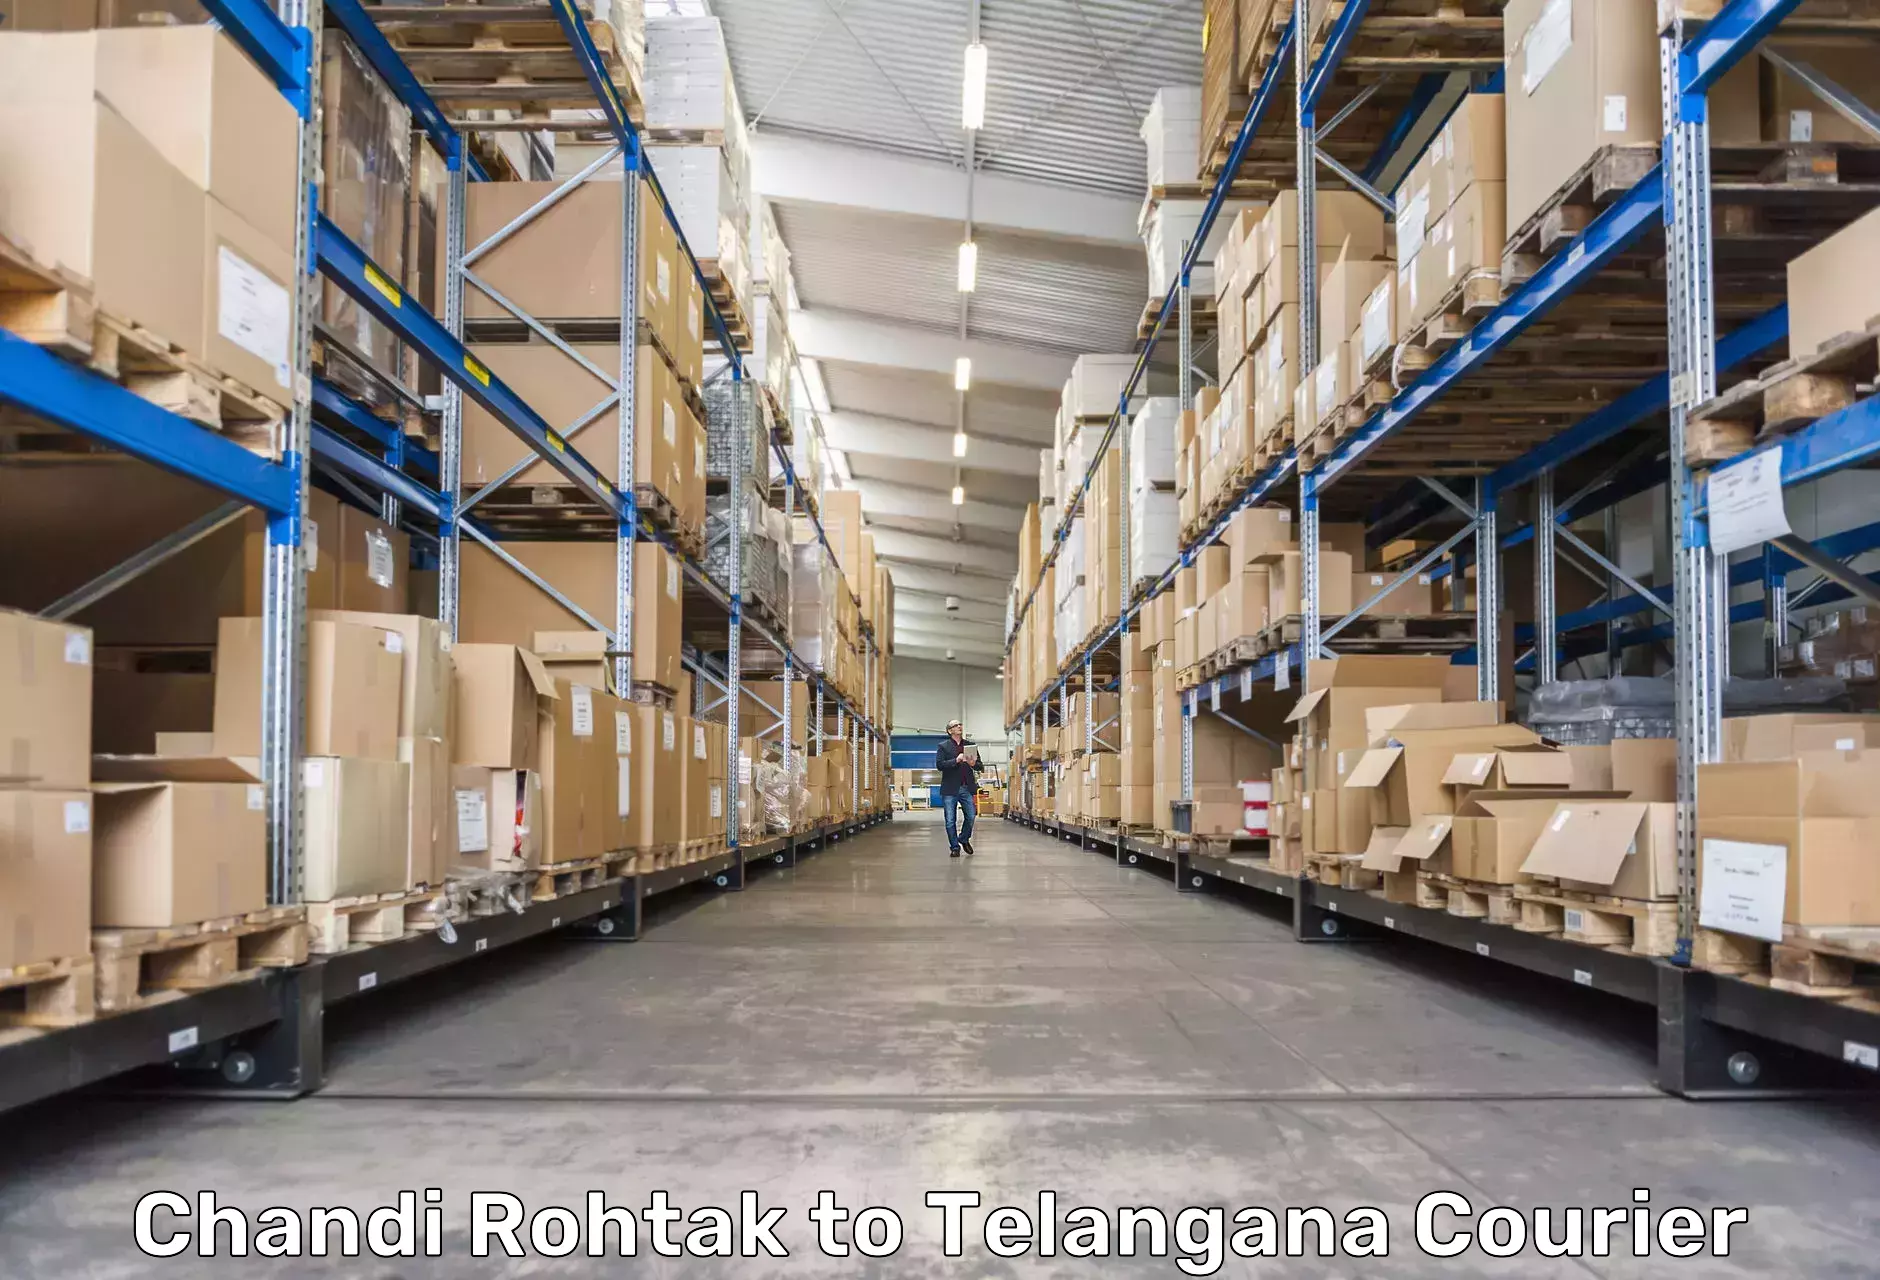 Express delivery capabilities Chandi Rohtak to Mancherial